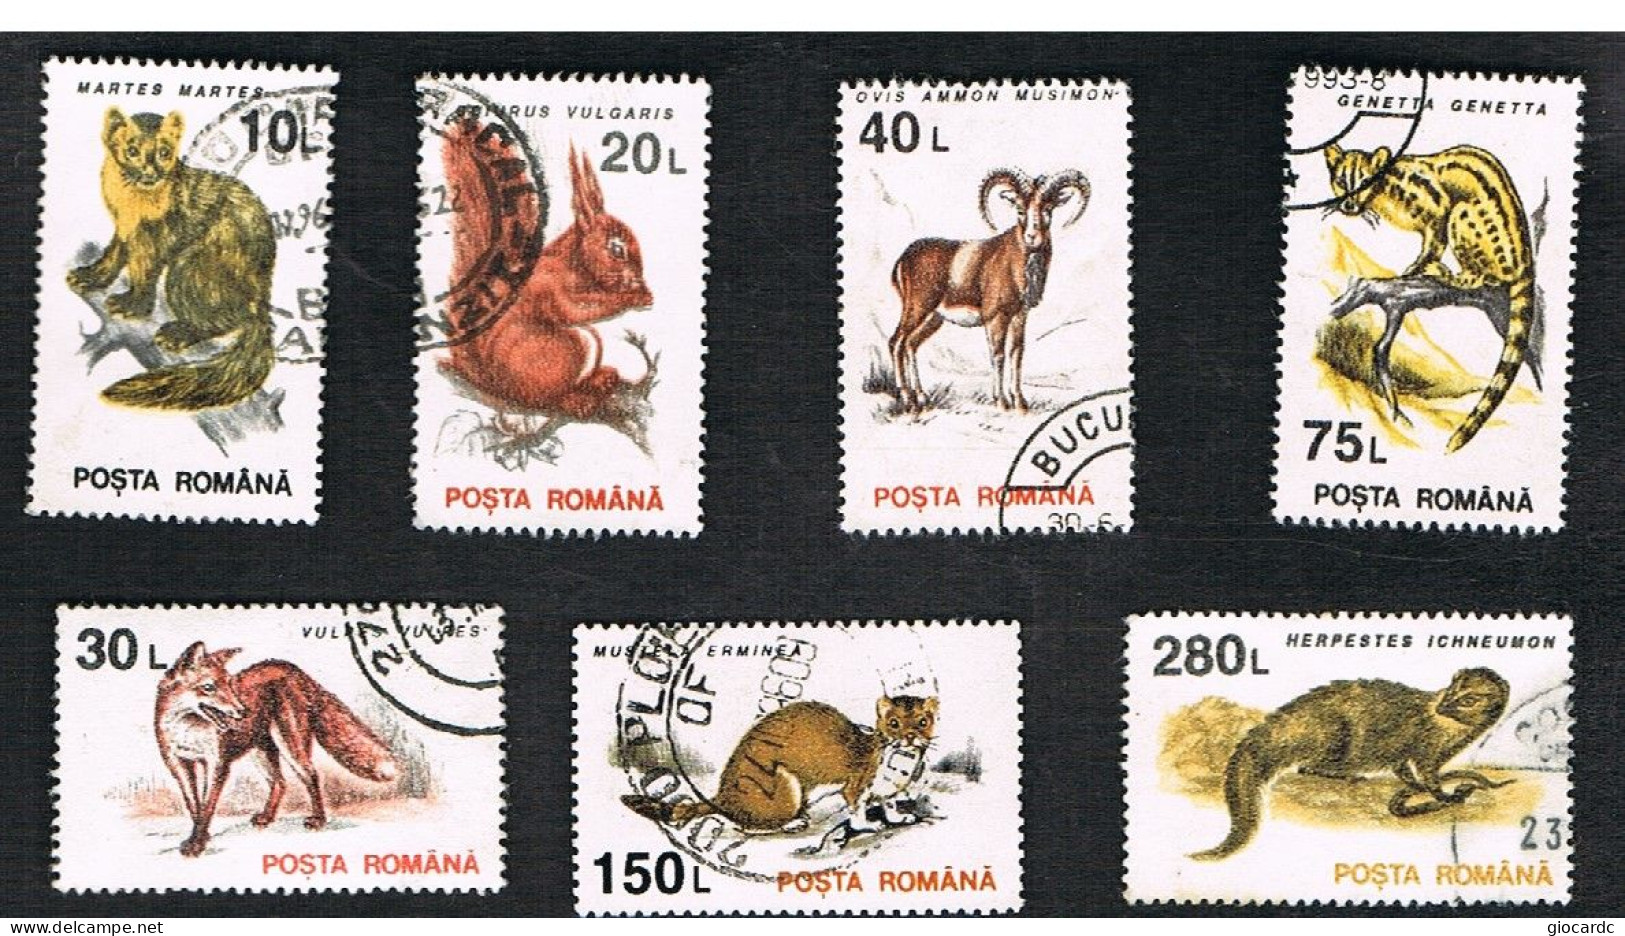 ROMANIA - SG 5533.5542  - 1995  CURRENT SERIE: ANIMALS   (7 STAMPS OF THE SET  ON WHITE PAPER)  - USED ° - Oblitérés